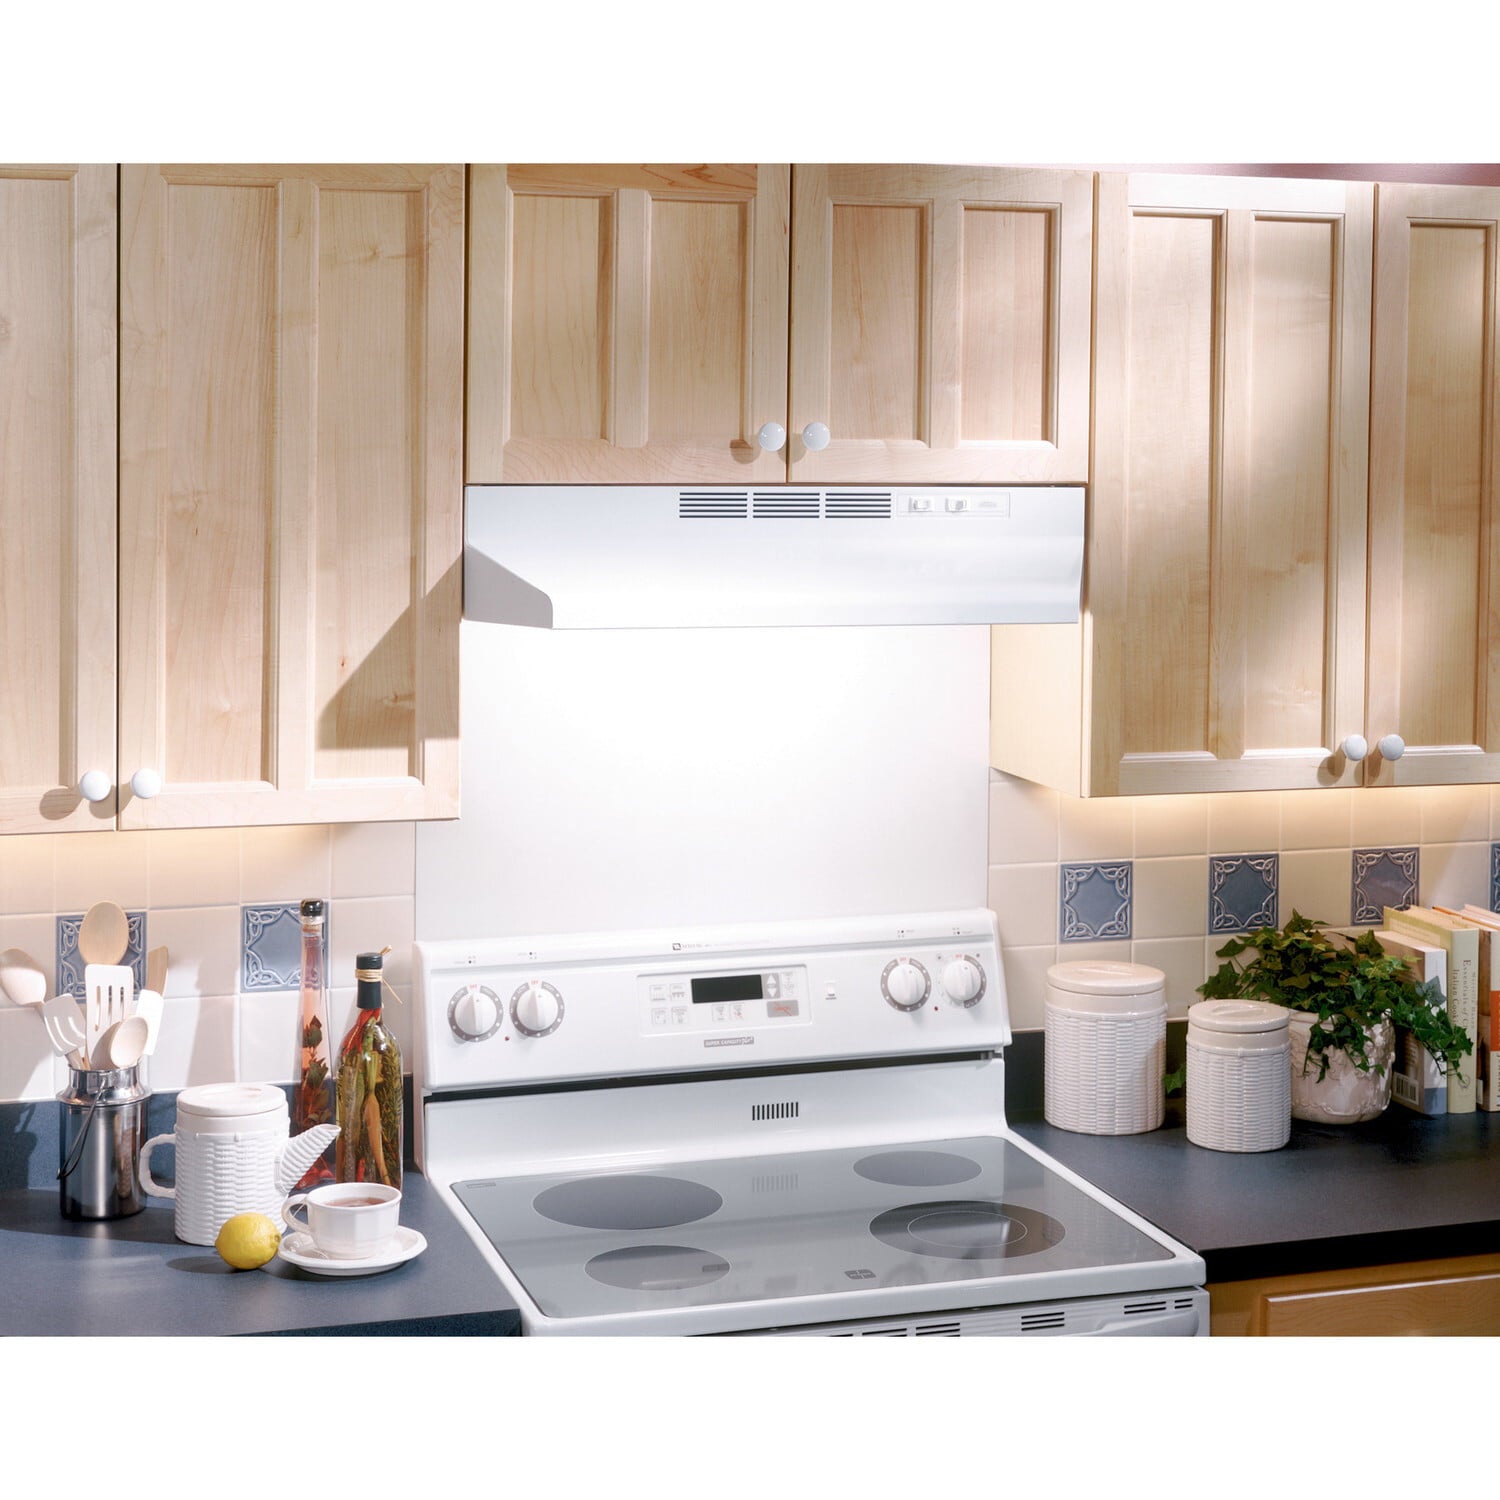 Broan BUEZ130WW Broan® 30-Inch Ductless Under-Cabinet Range Hood W/ Easy Install System, White